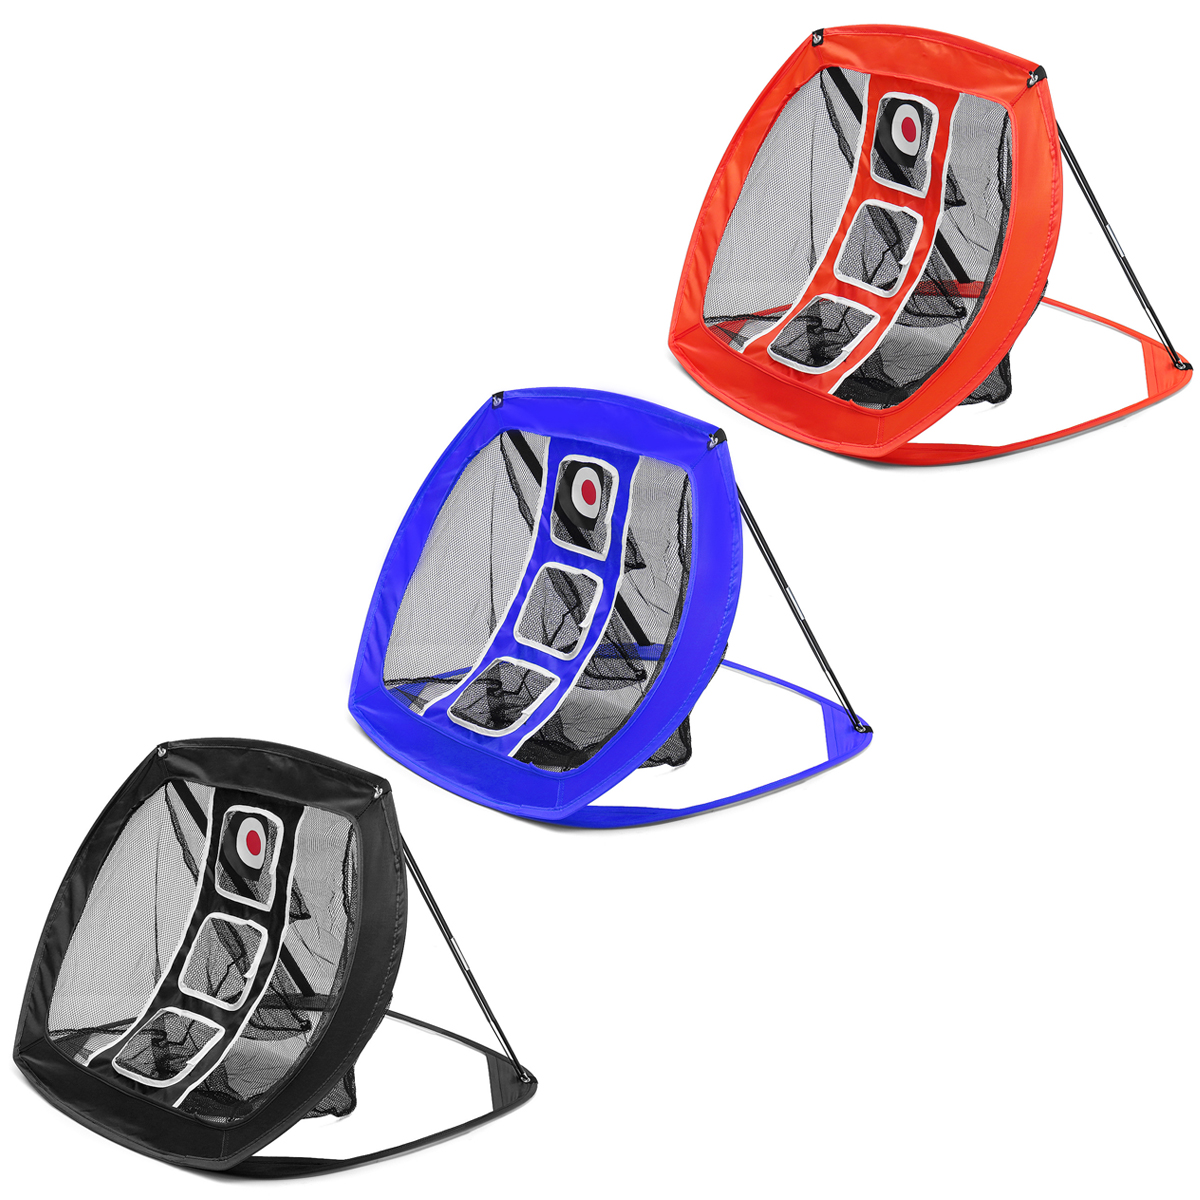 Foldable-Golf-Chipping-Net-Backyard-Driving-Aid-Indoor-Outdoor-Hitting-Practice-Garden-Living-Room-B-1688178-2